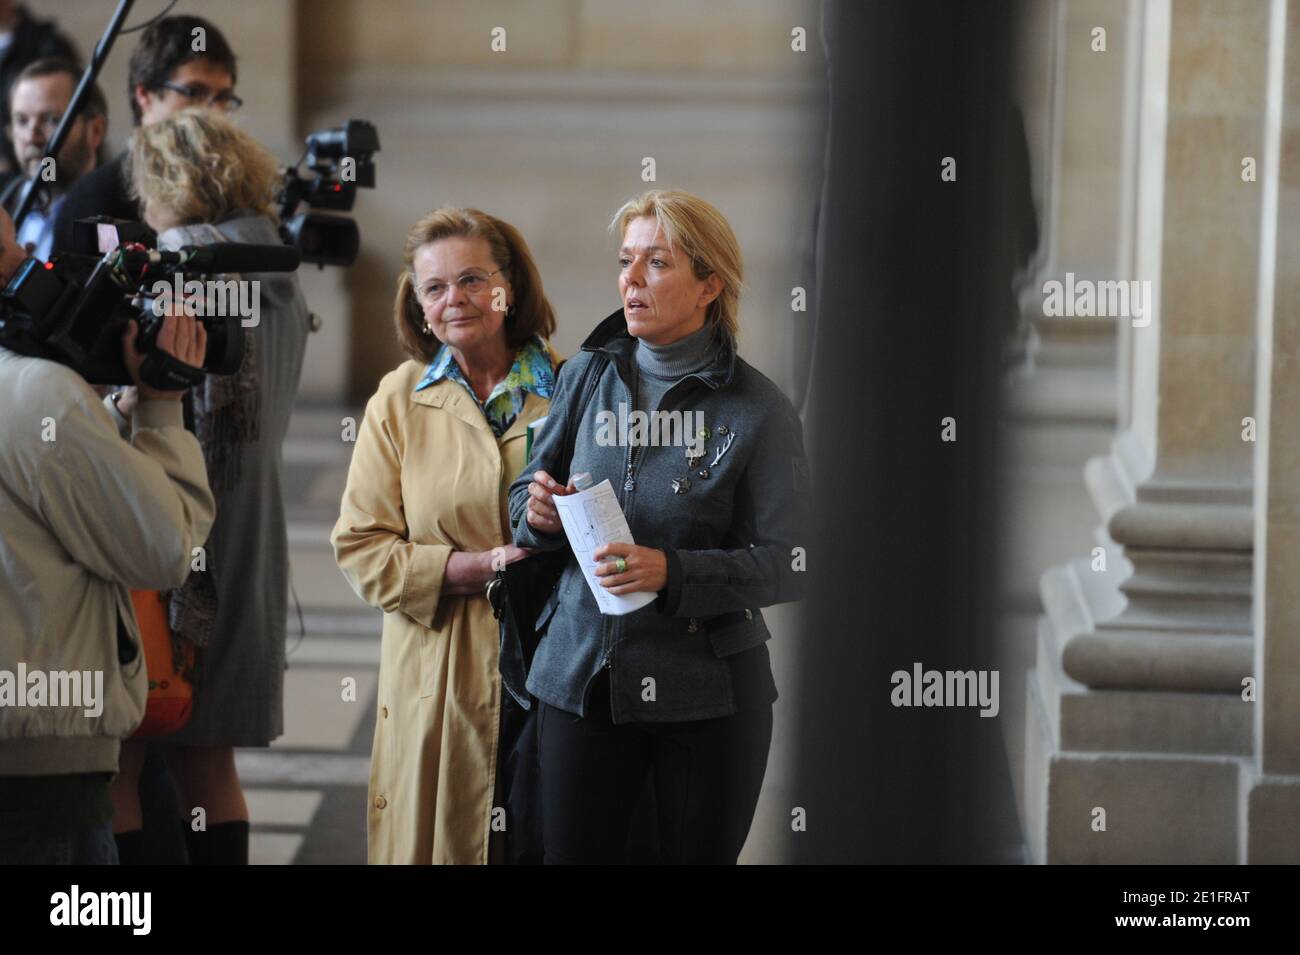 Krombach's sister and Diana Gunther the daughter of German cardiologist Dieter Krombach, arrive at the Palais de Justice to attend her father, German cardiologist Dieter Krombach's trial for the murder of Kalinka Bamberski, in Paris, France on March 29, 2011. The German doctor is accused of having raped and killed his then 14-year-old stepdaughter, Kalinka Bamberski, in the summer of 1982 while she was holidaying with her mother at Krombach's home at Lake Constance, southern Germany. A court in Germany ruled that Krombach could not be held responsible for the death, but in 1995 a court in Pari Stock Photo